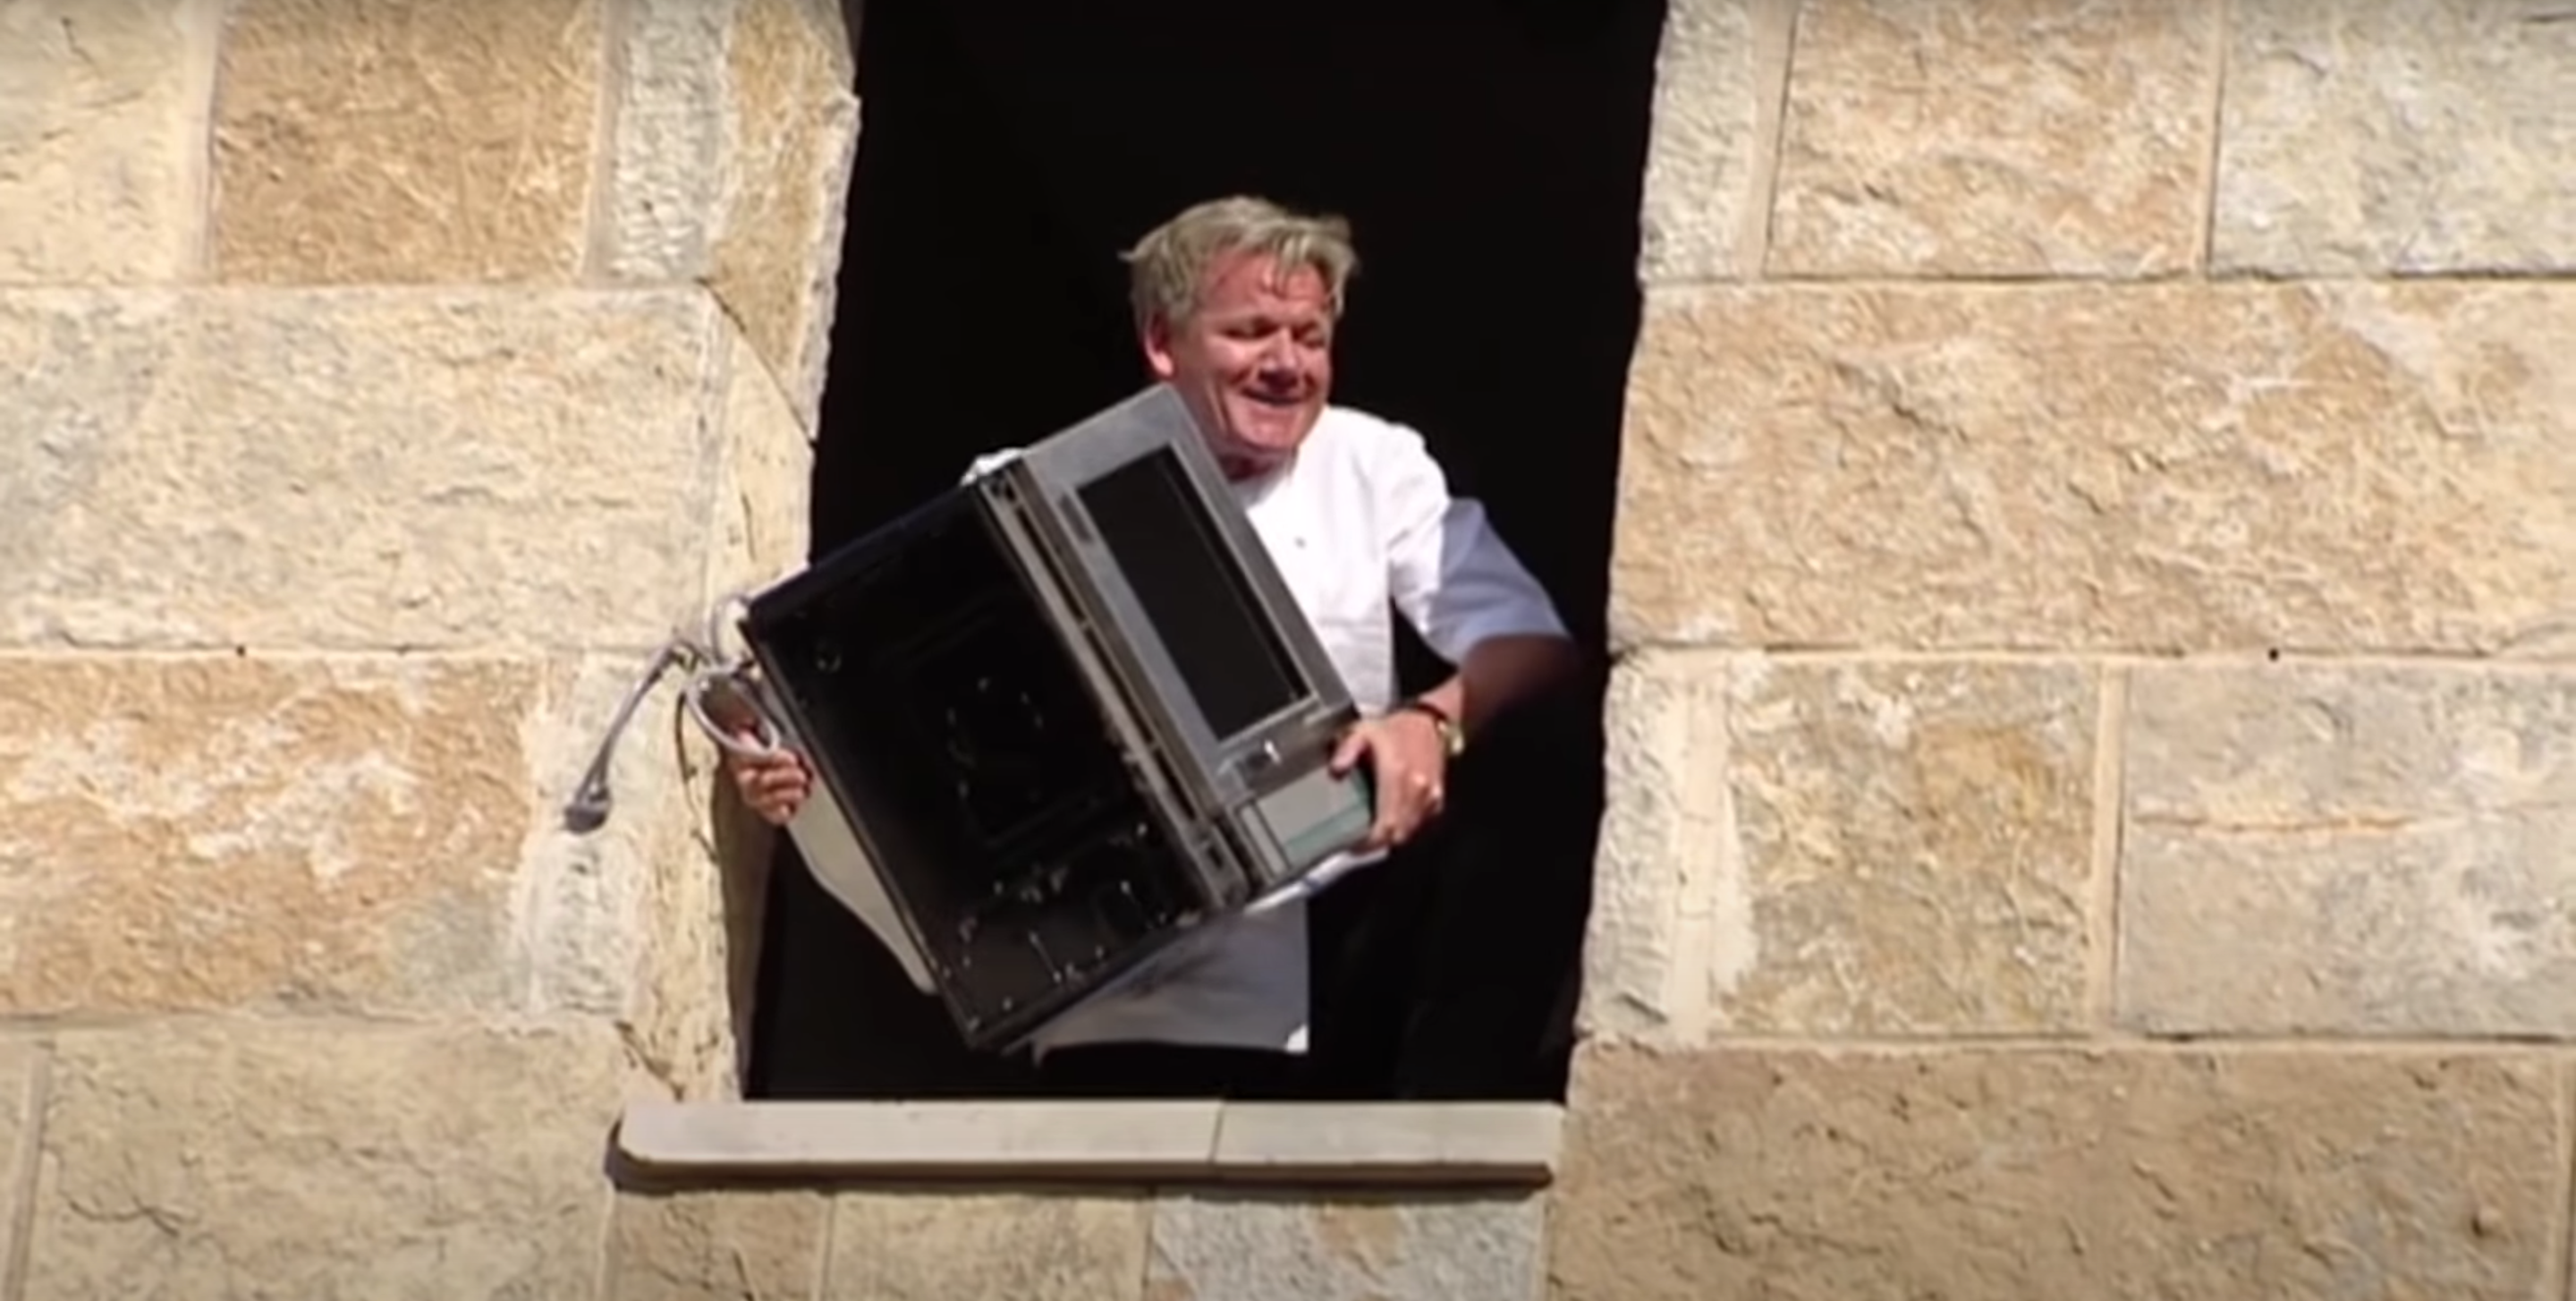 Gordon Ramsay prepares to throw 'Chef Mike' out the window.